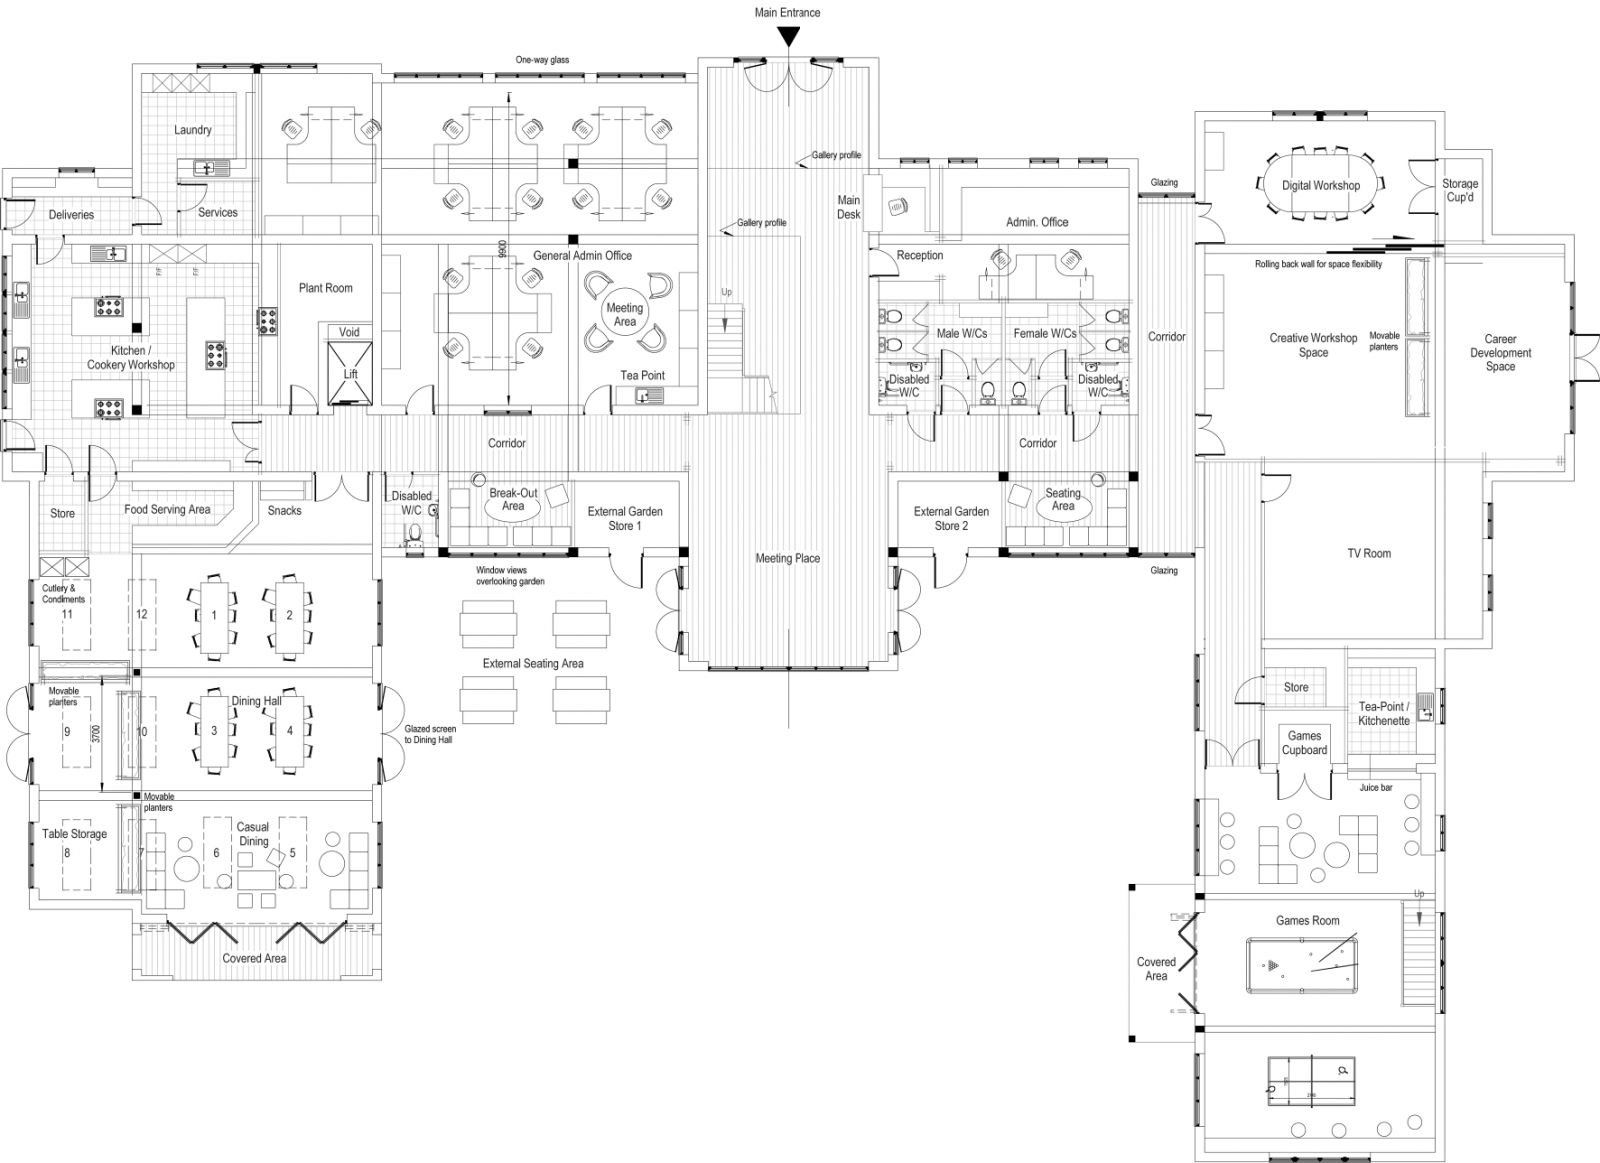 Proposed plans for the first floor of The House of Teens Unite